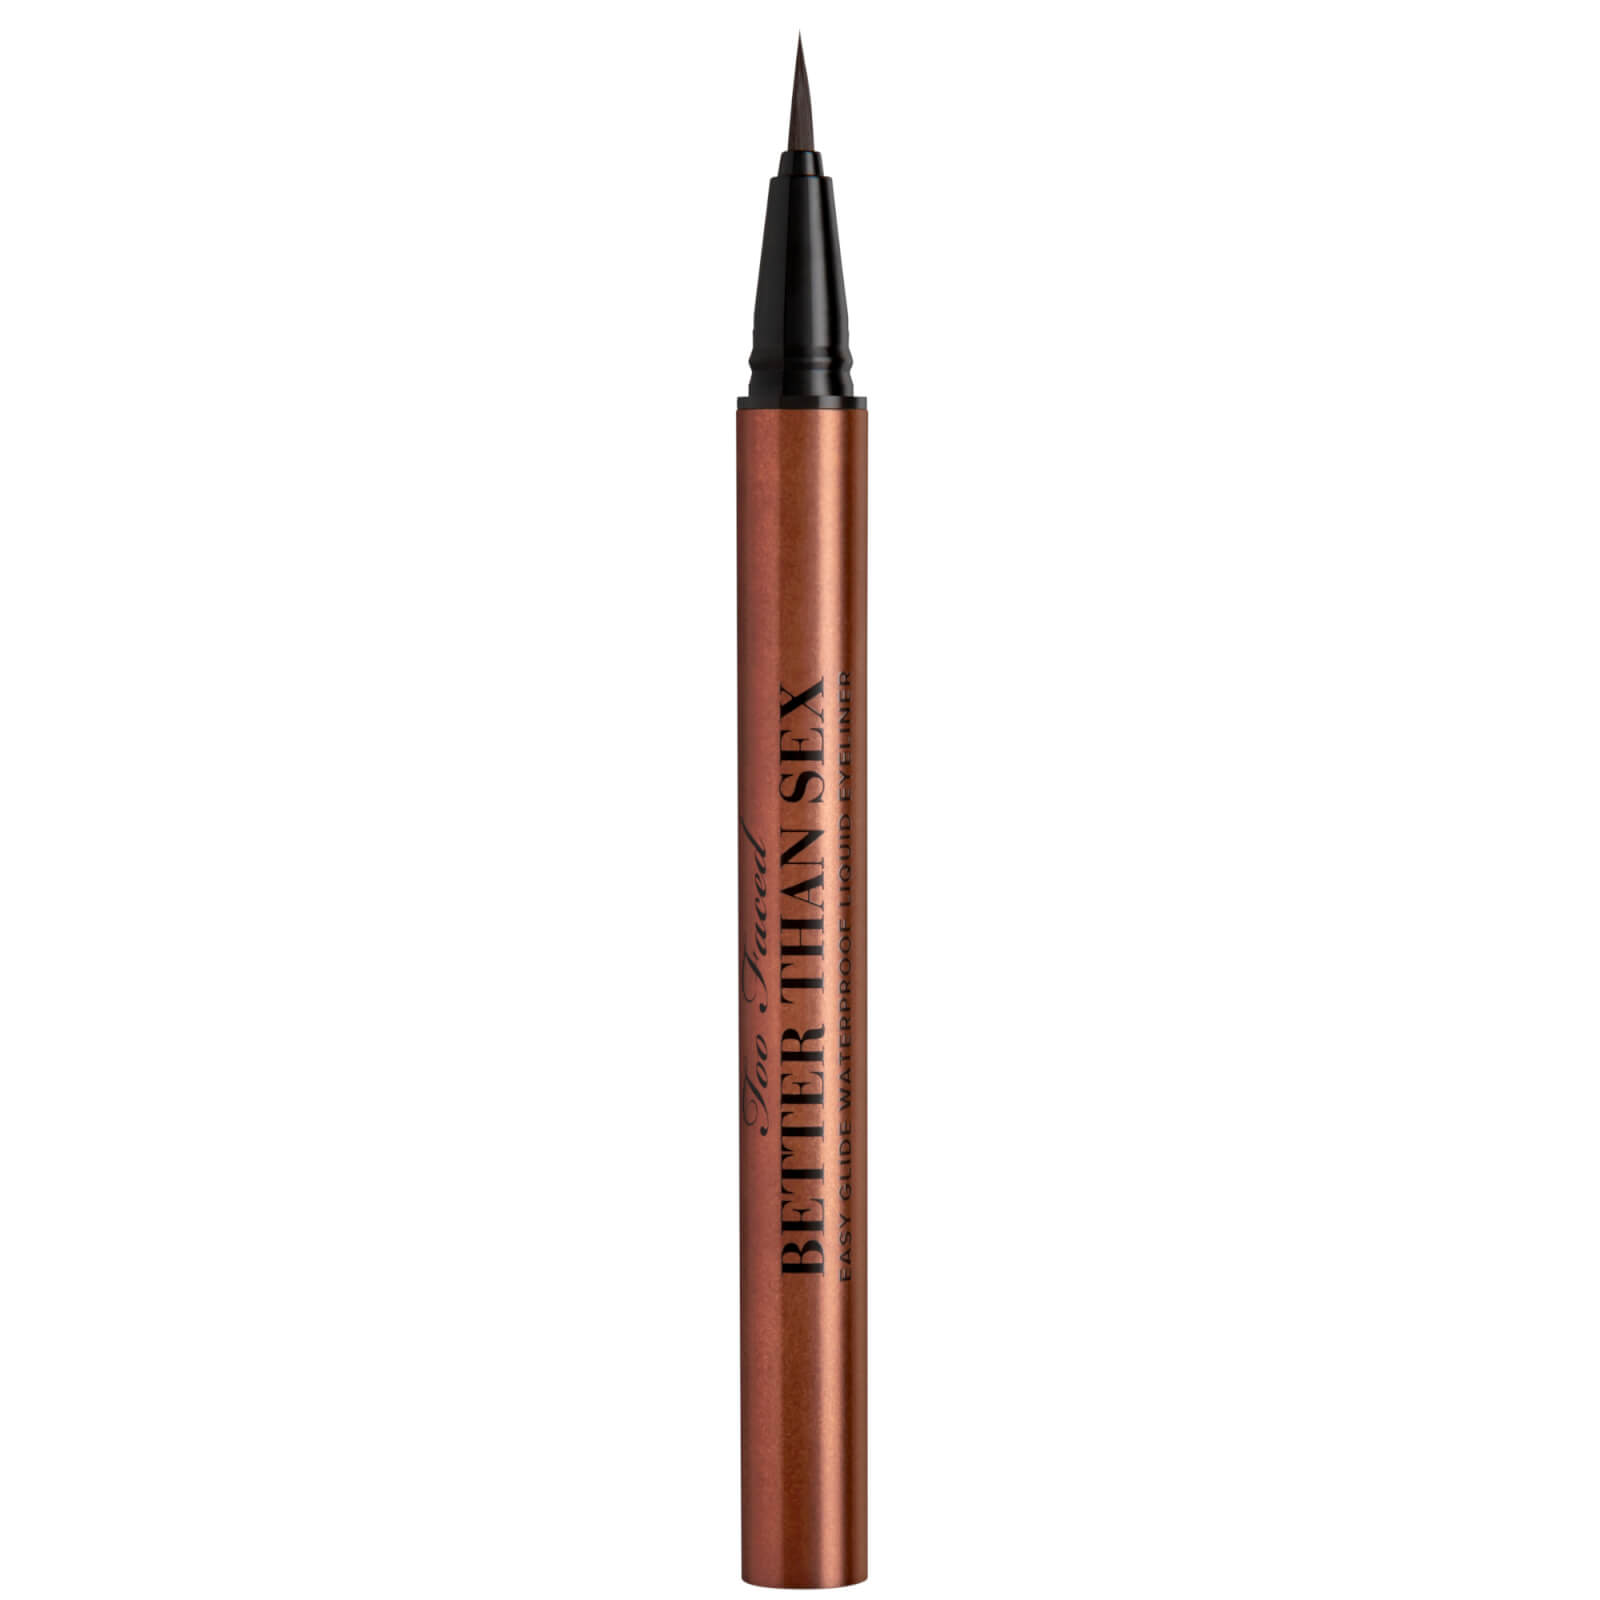 Too Faced Better Than Sex Easy Glide Waterproof Liquid Eyeliner 0.6ml (Various Shades) - Chocolate von Too Faced